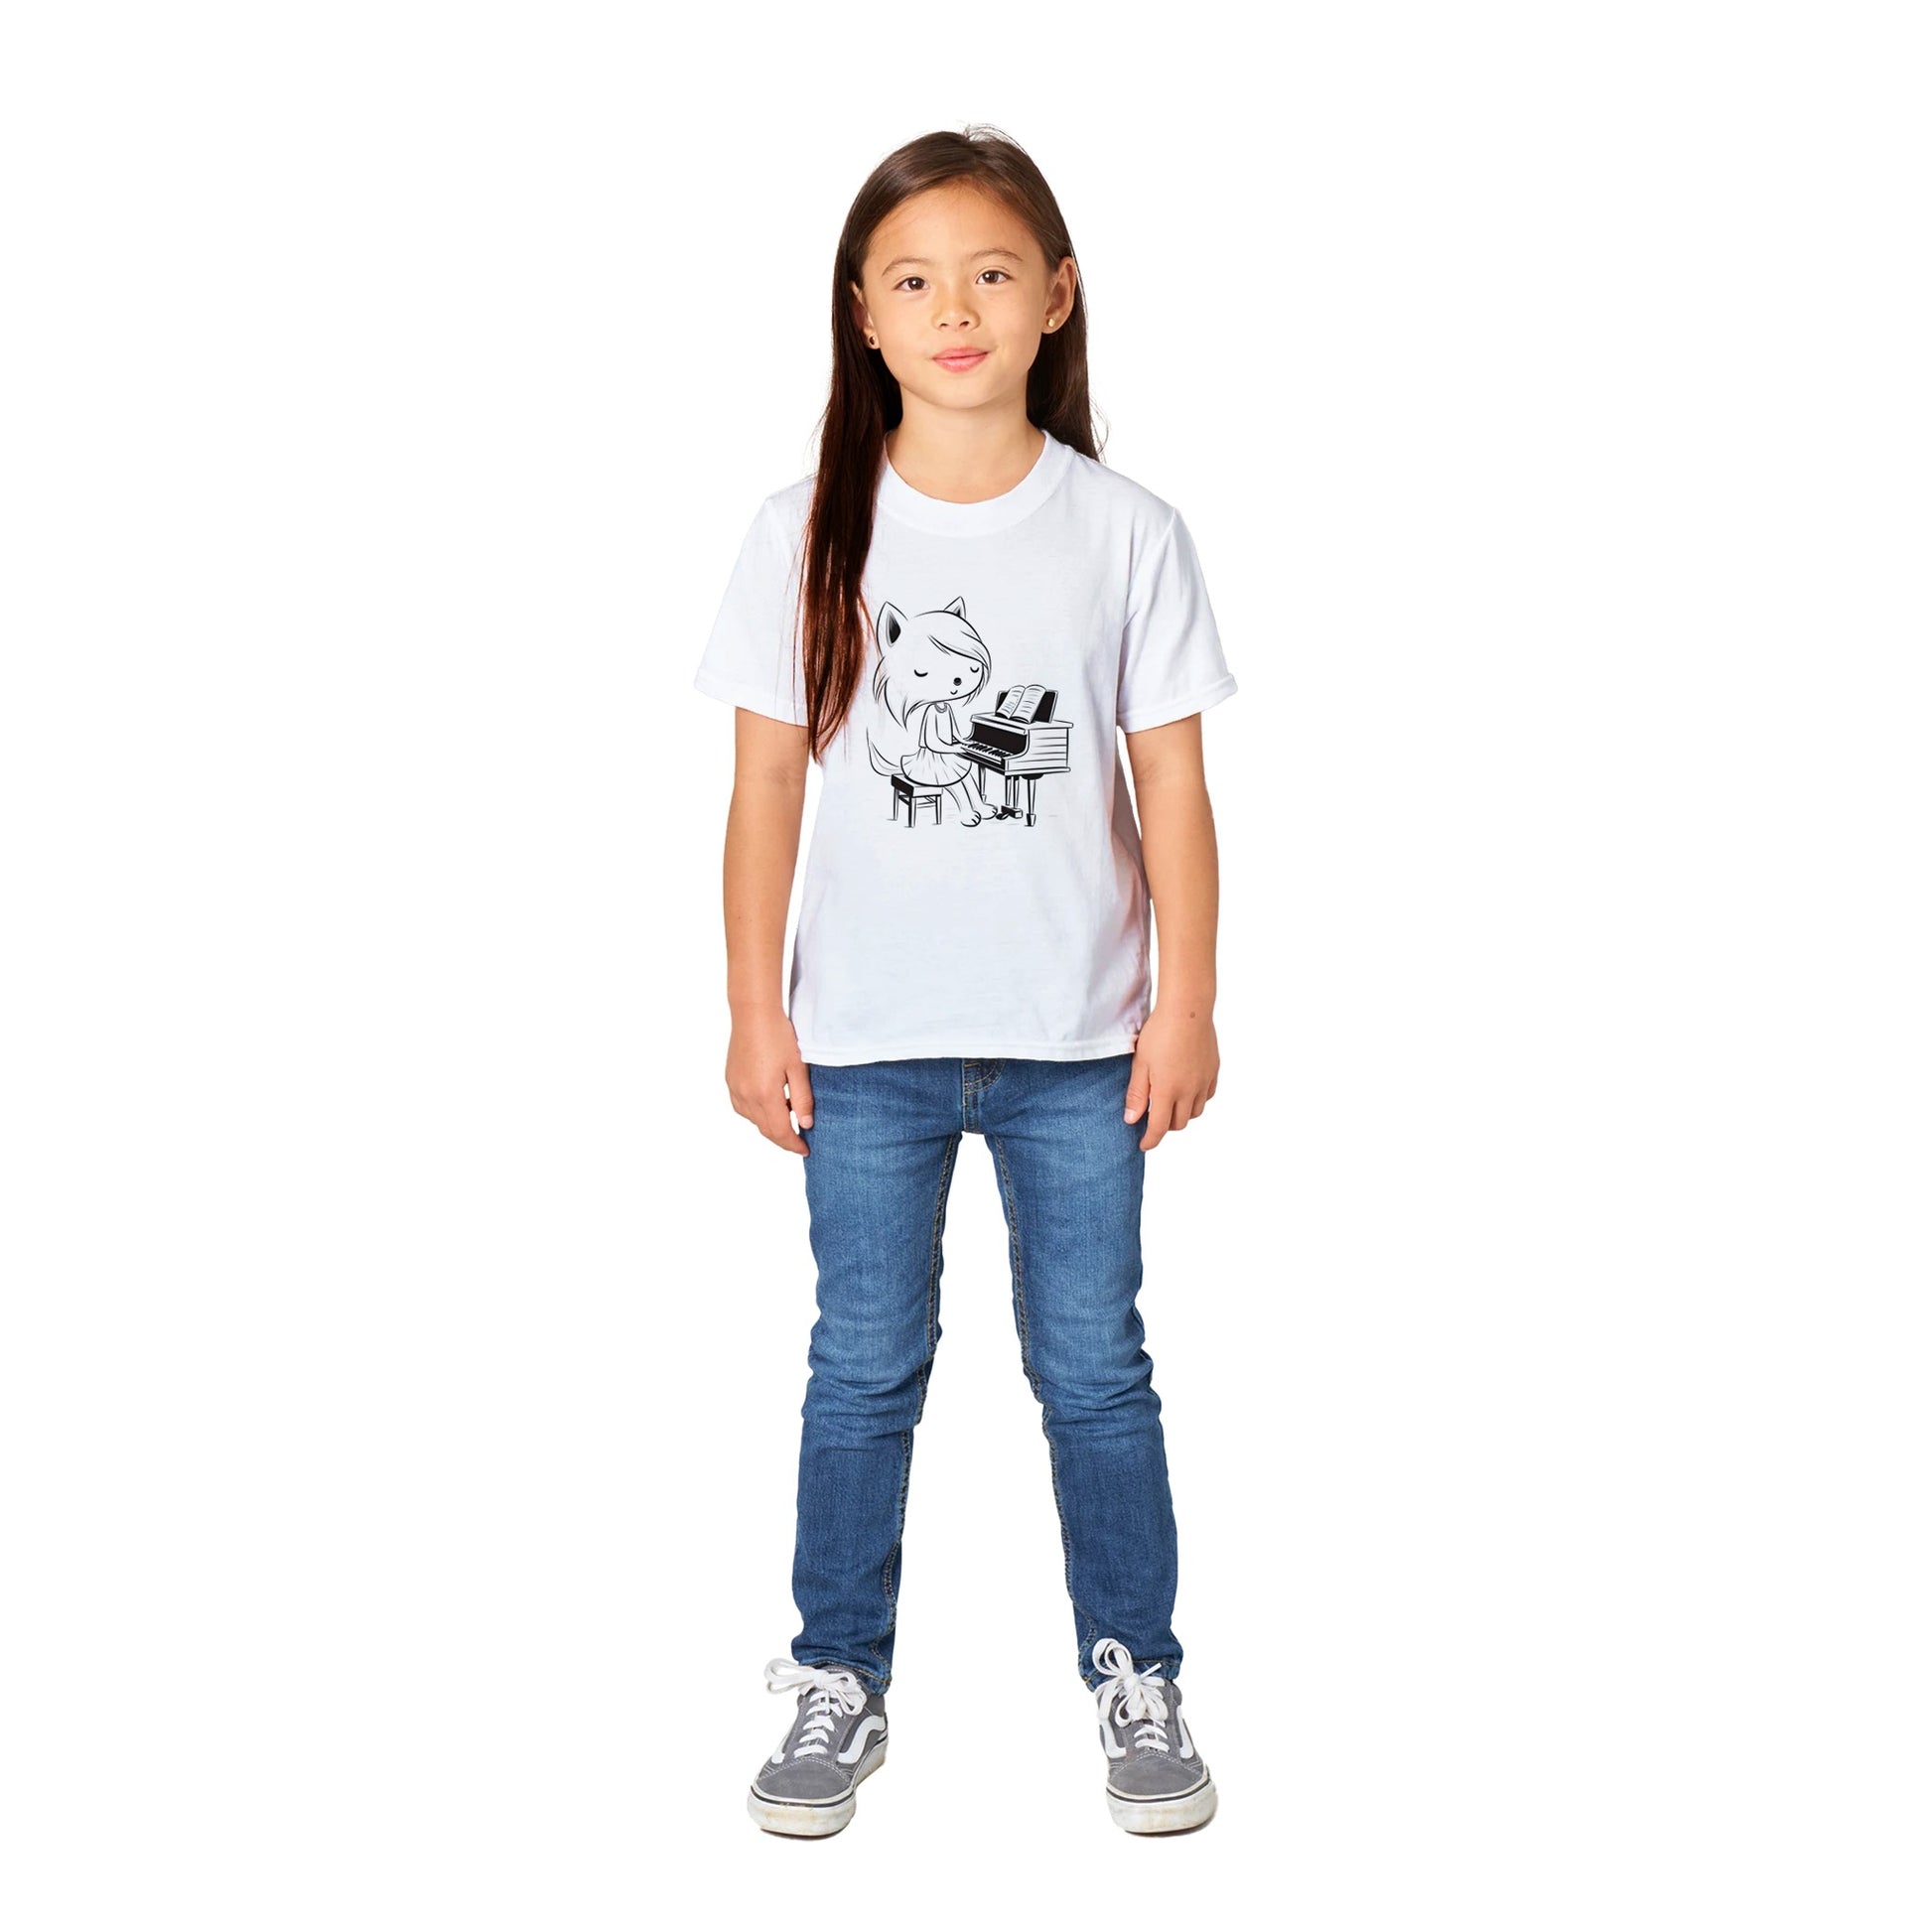 girl wearing a white kids t-shirt with cute fox playing the piano print